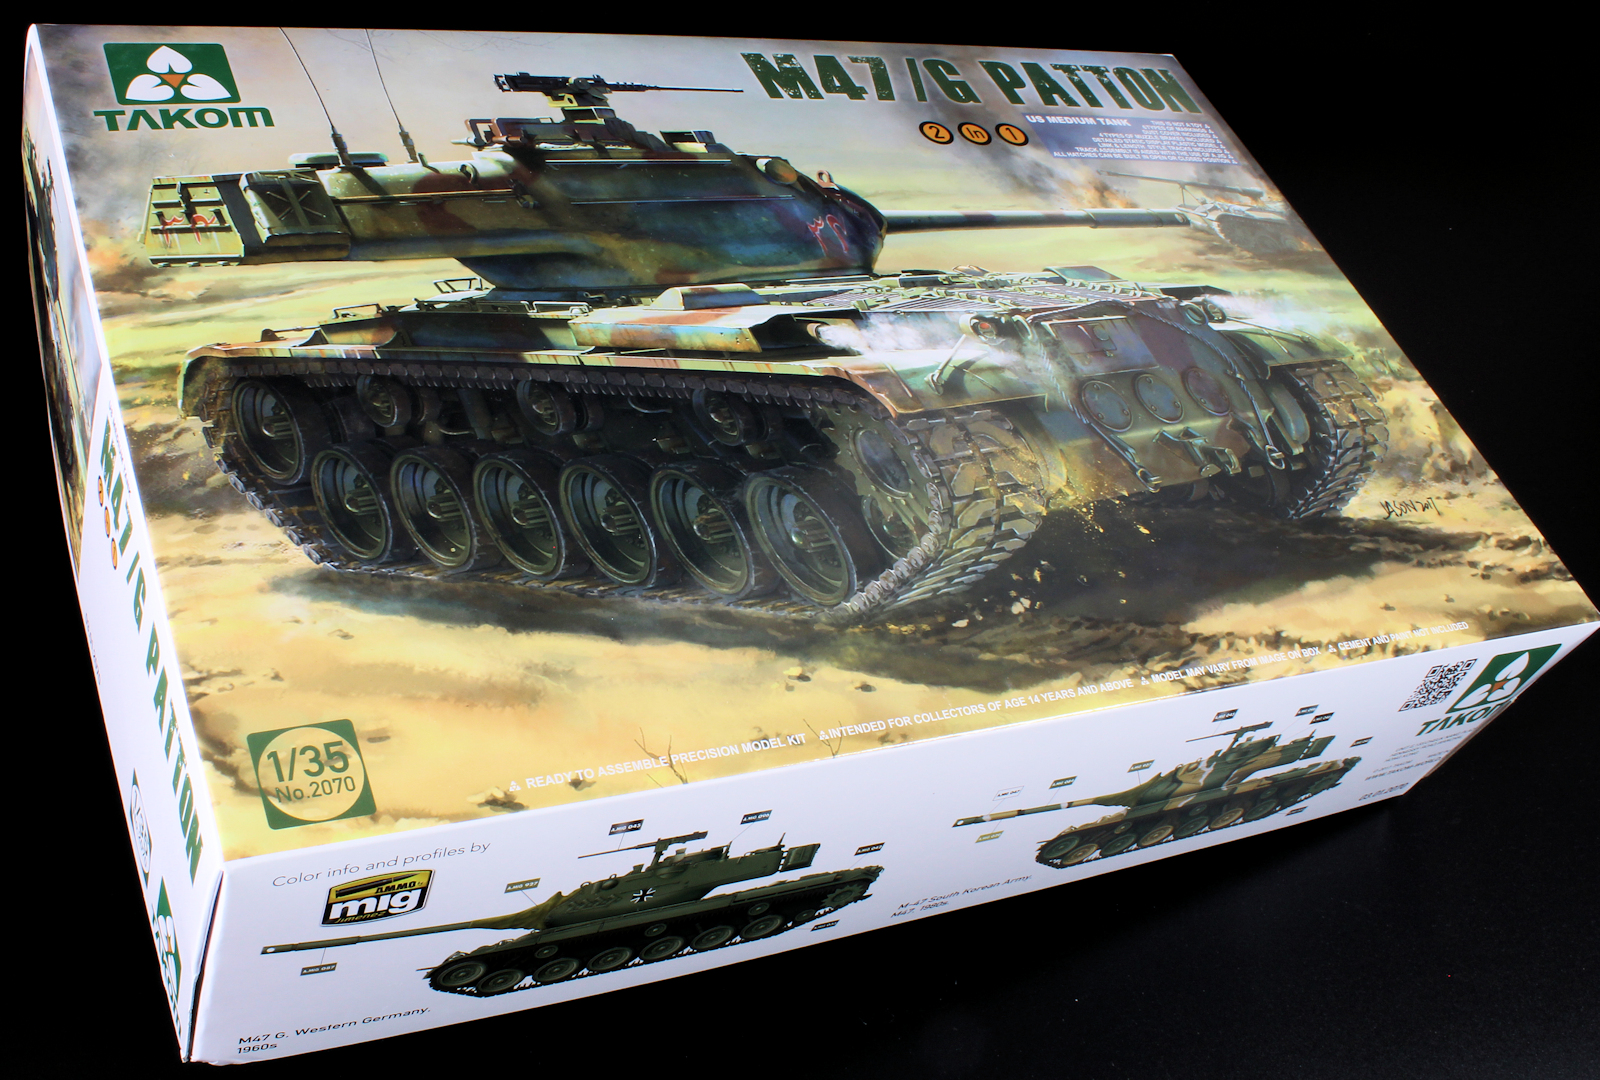 The Modelling News: In-Boxed: the new 35th scale M47 Patton from Takom